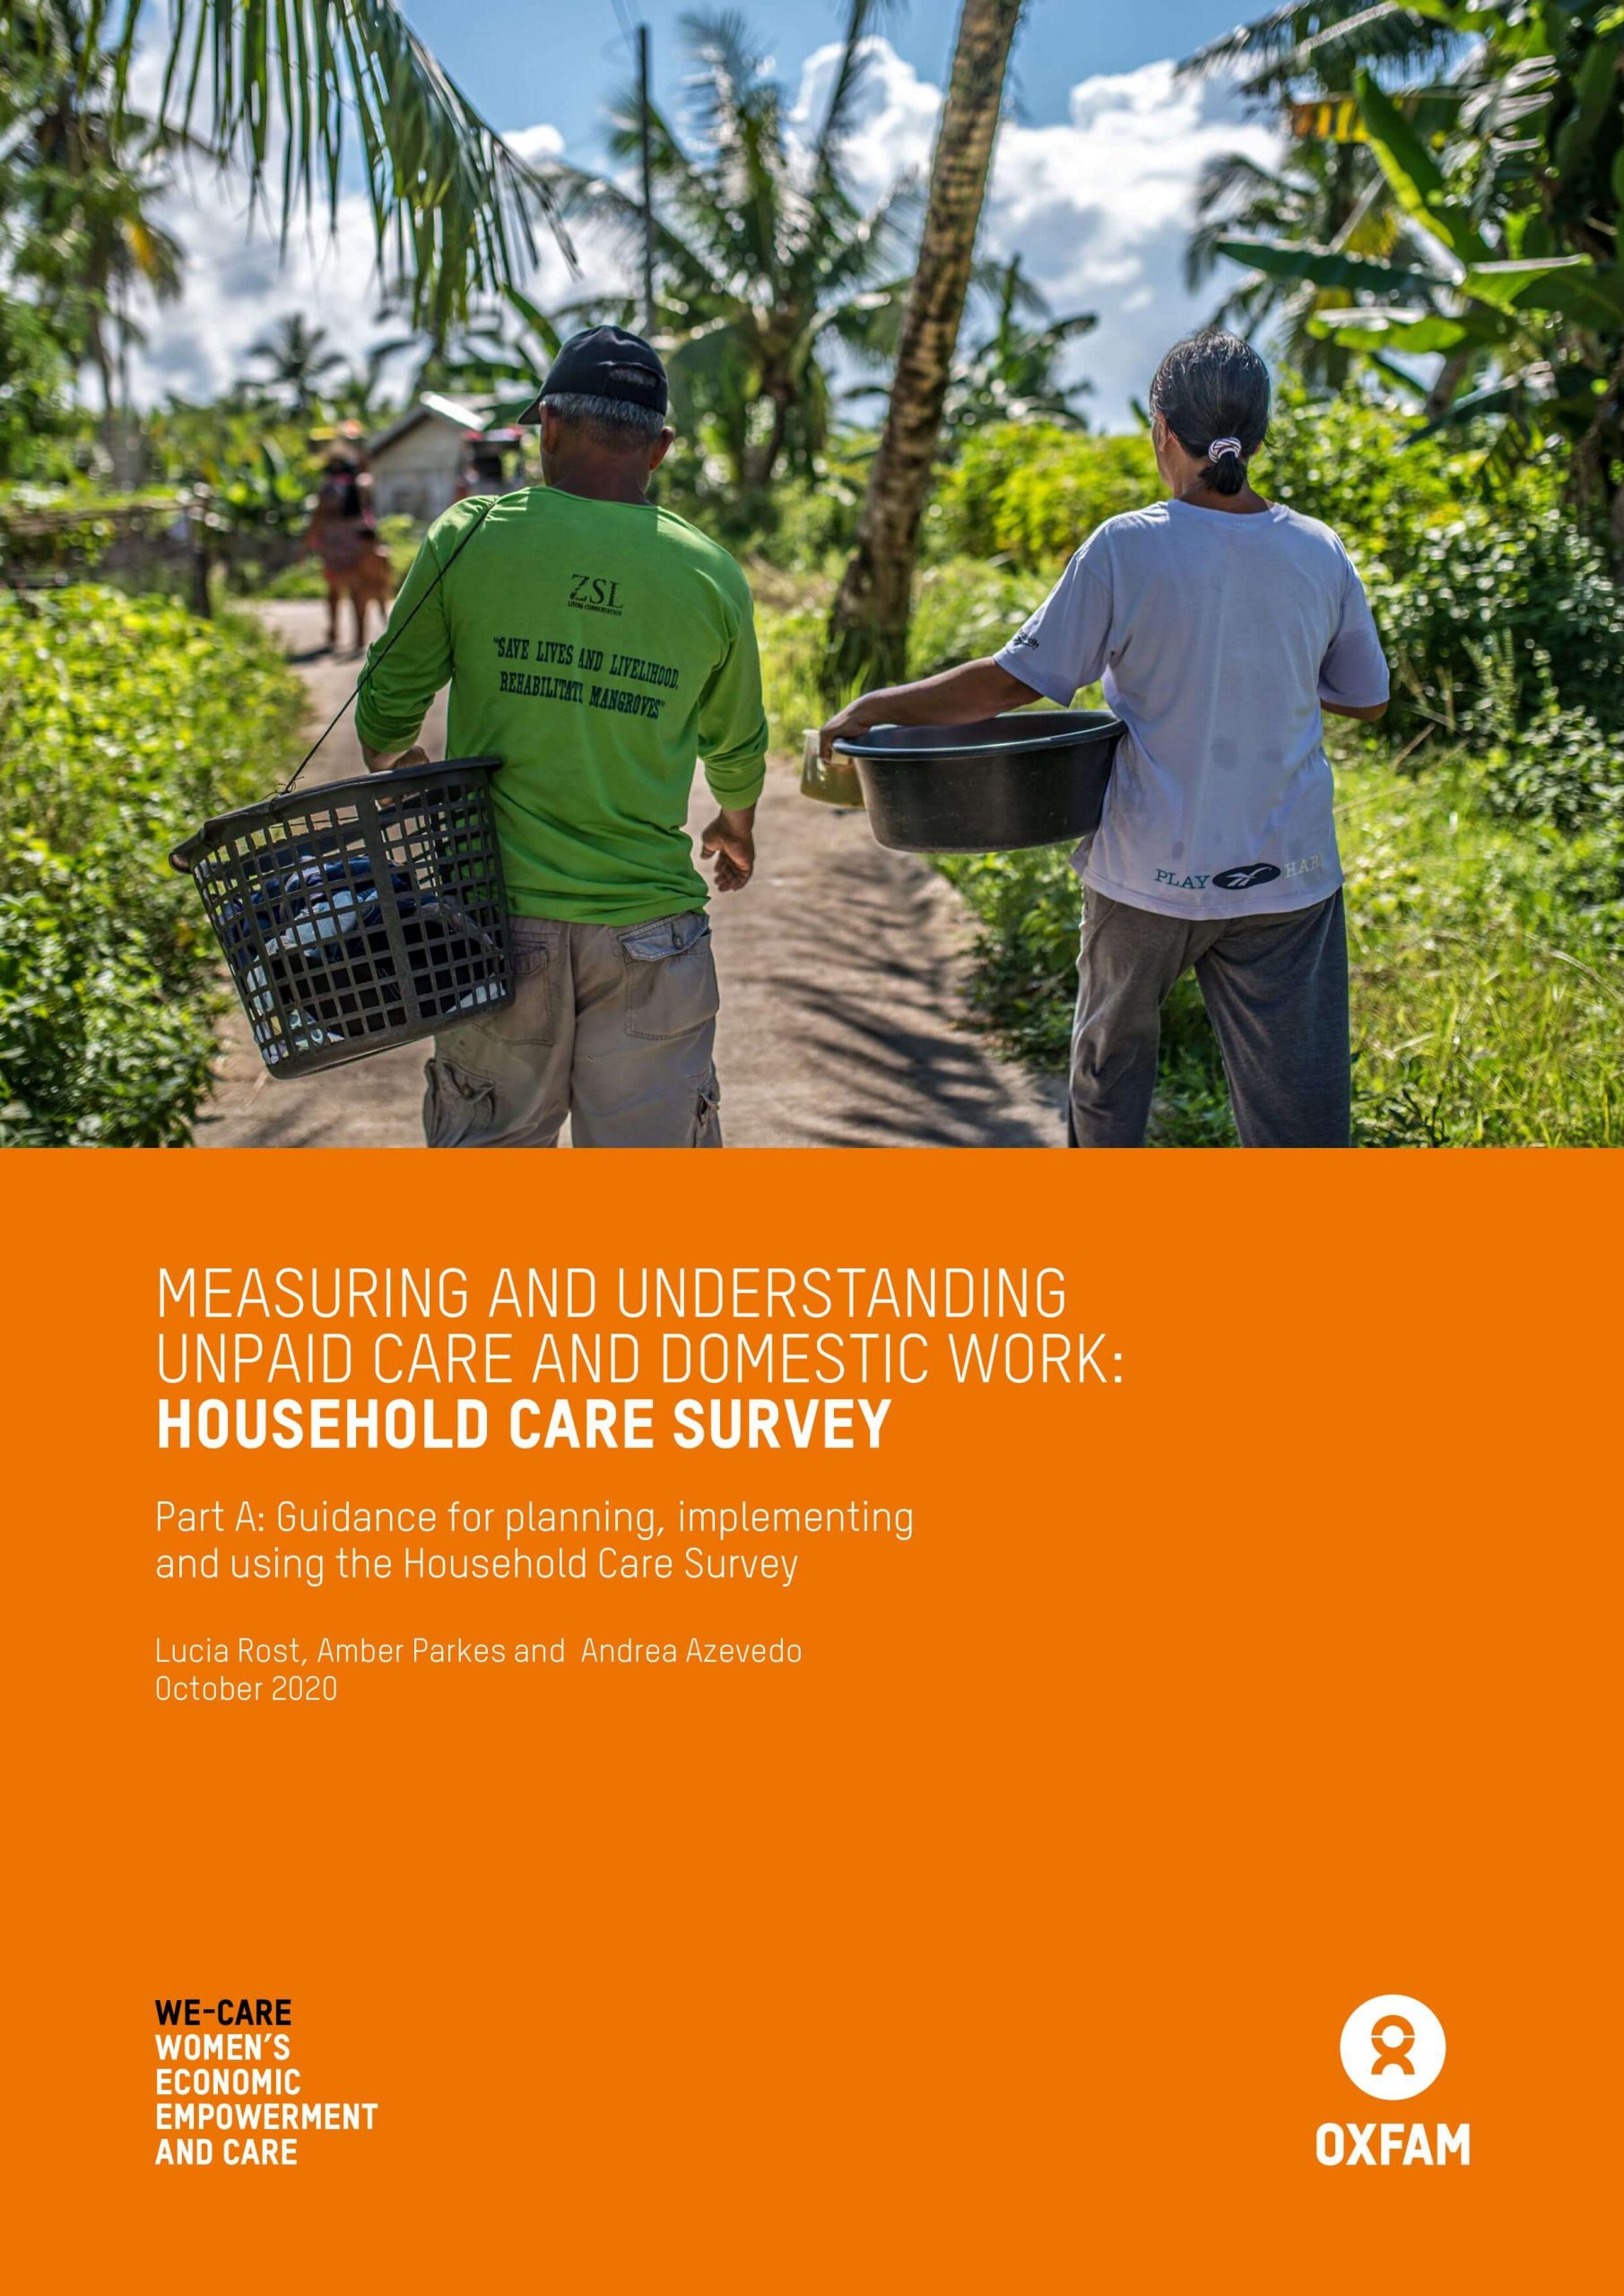 Measuring and understanding unpaid care and domestic work: Household care survey toolkit